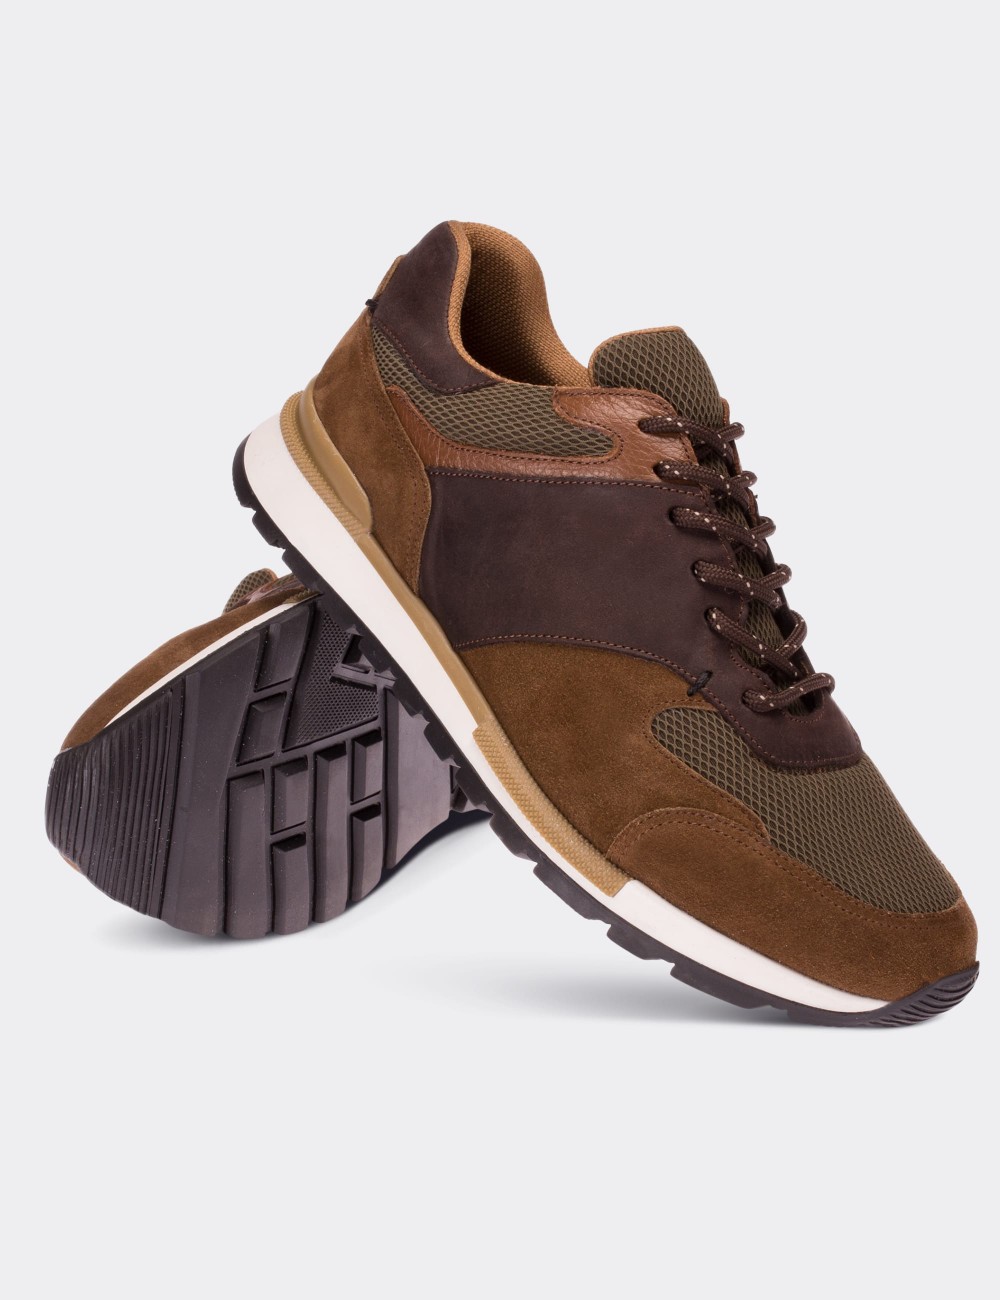 Brown Suede Leather Sneakers - 01718MKHVT01